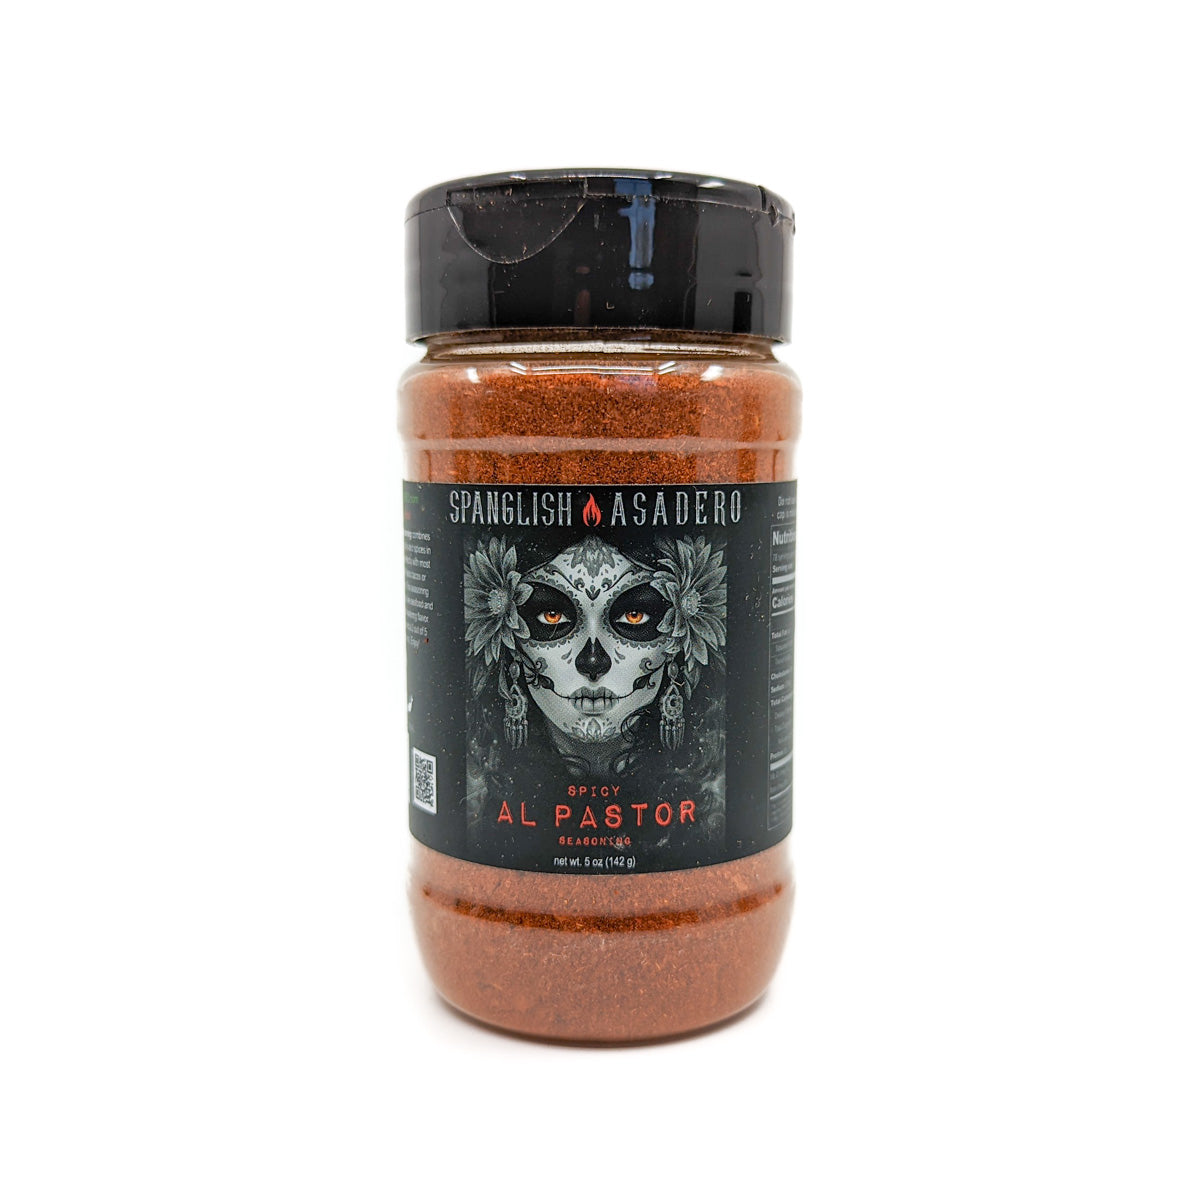 Spicy Al Pastor seasoning combines the rich and earthy flavors of chilies and spices of&nbsp; Mexico in a bottle. Delicious on any pork, beef, poultry, or seafood dish. It’s spicy, smokey flavor can’t be beat. Great for tacos! 5 oz. jar